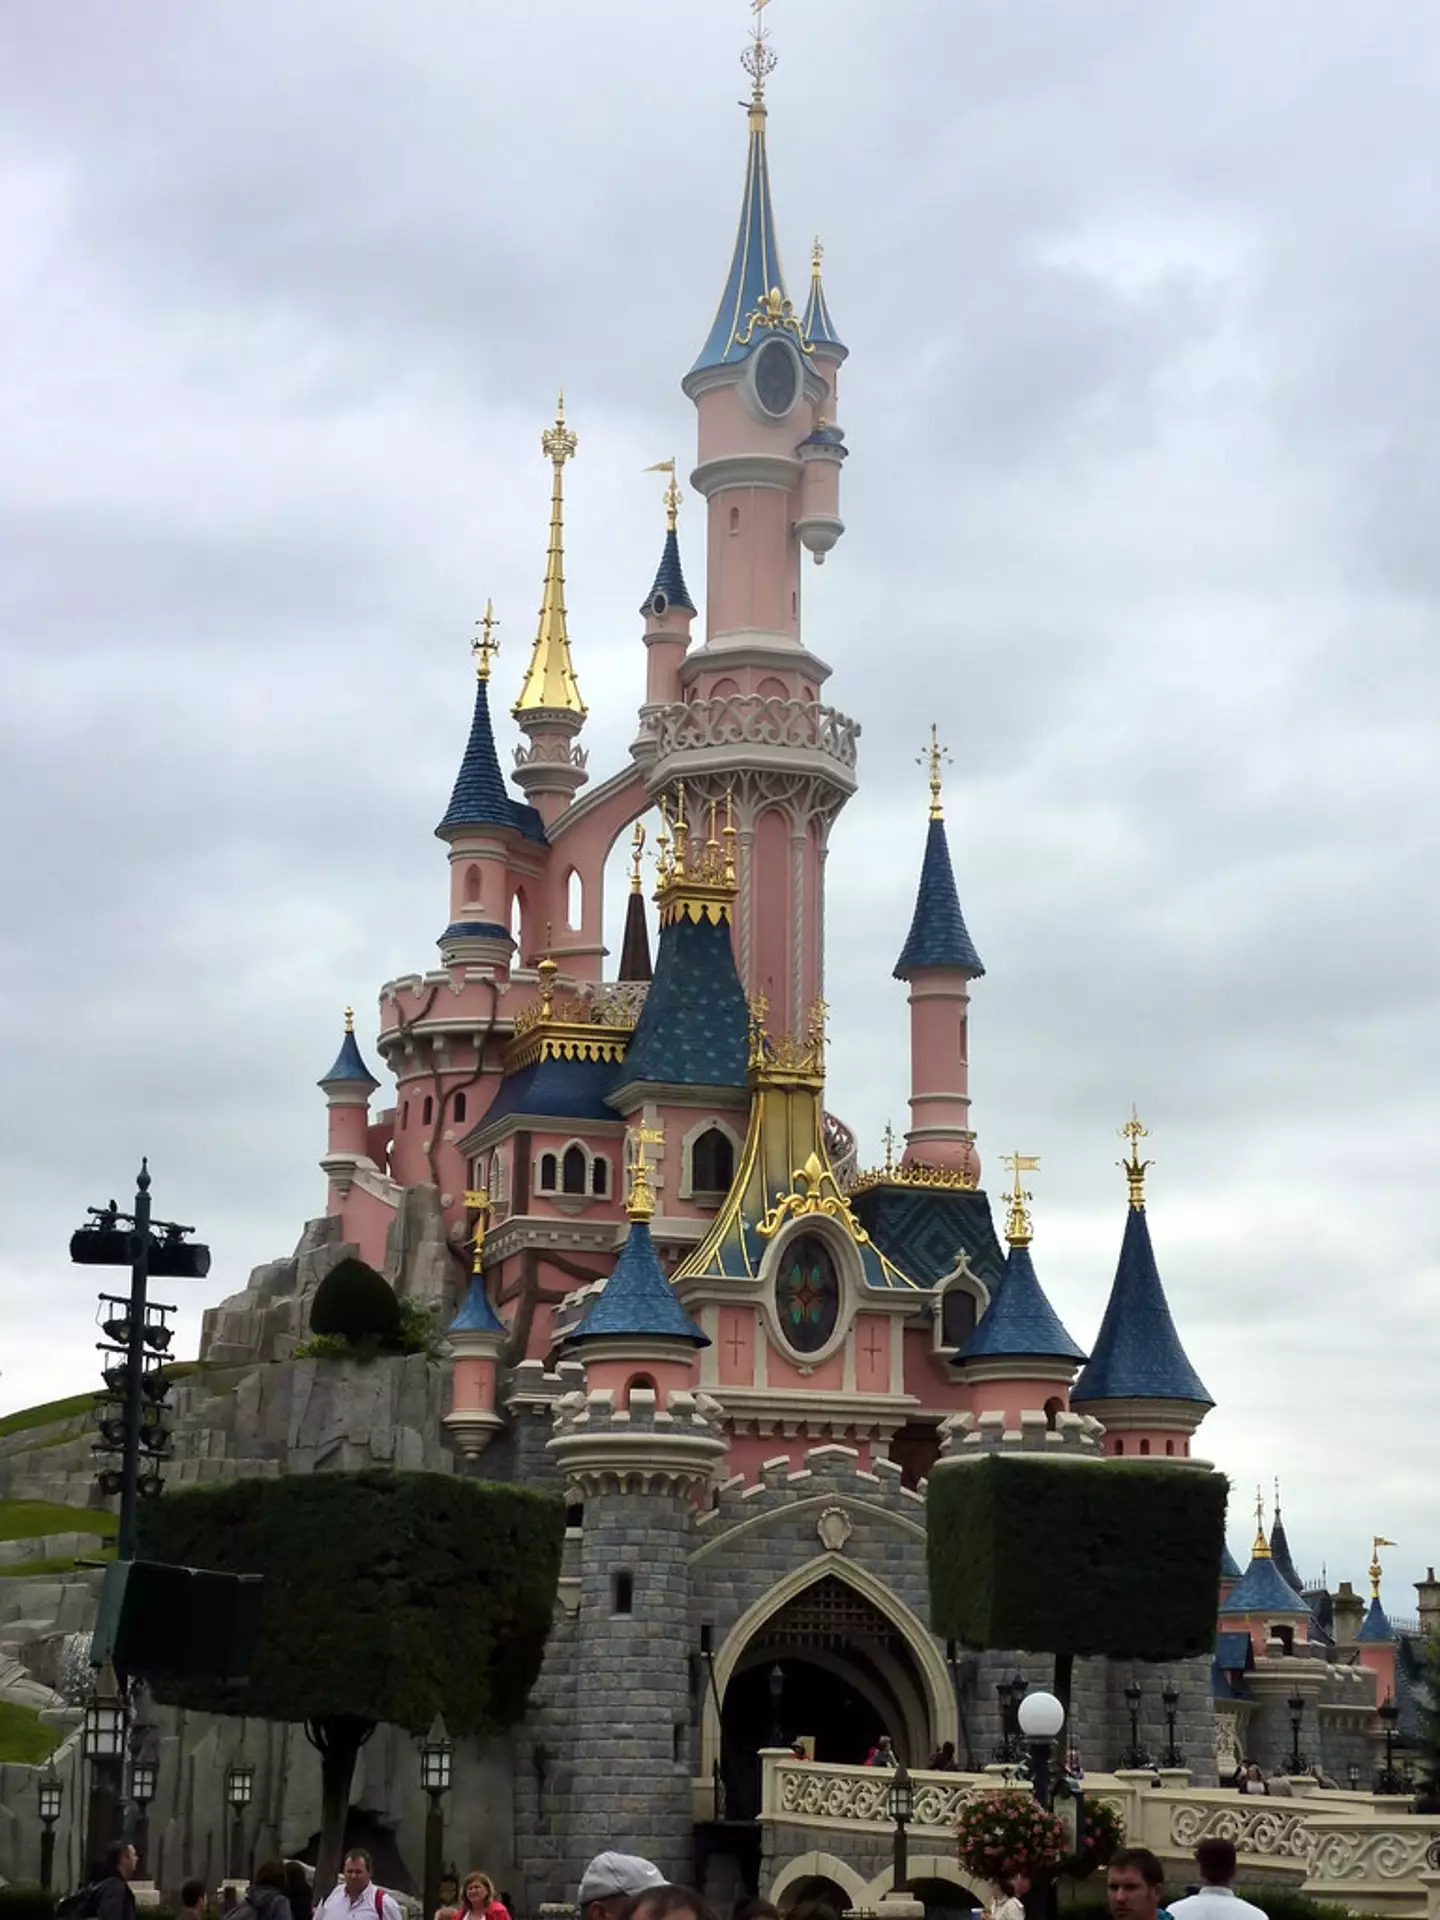 There will be no direct trains to from London to Disneyland Paris from June next year.